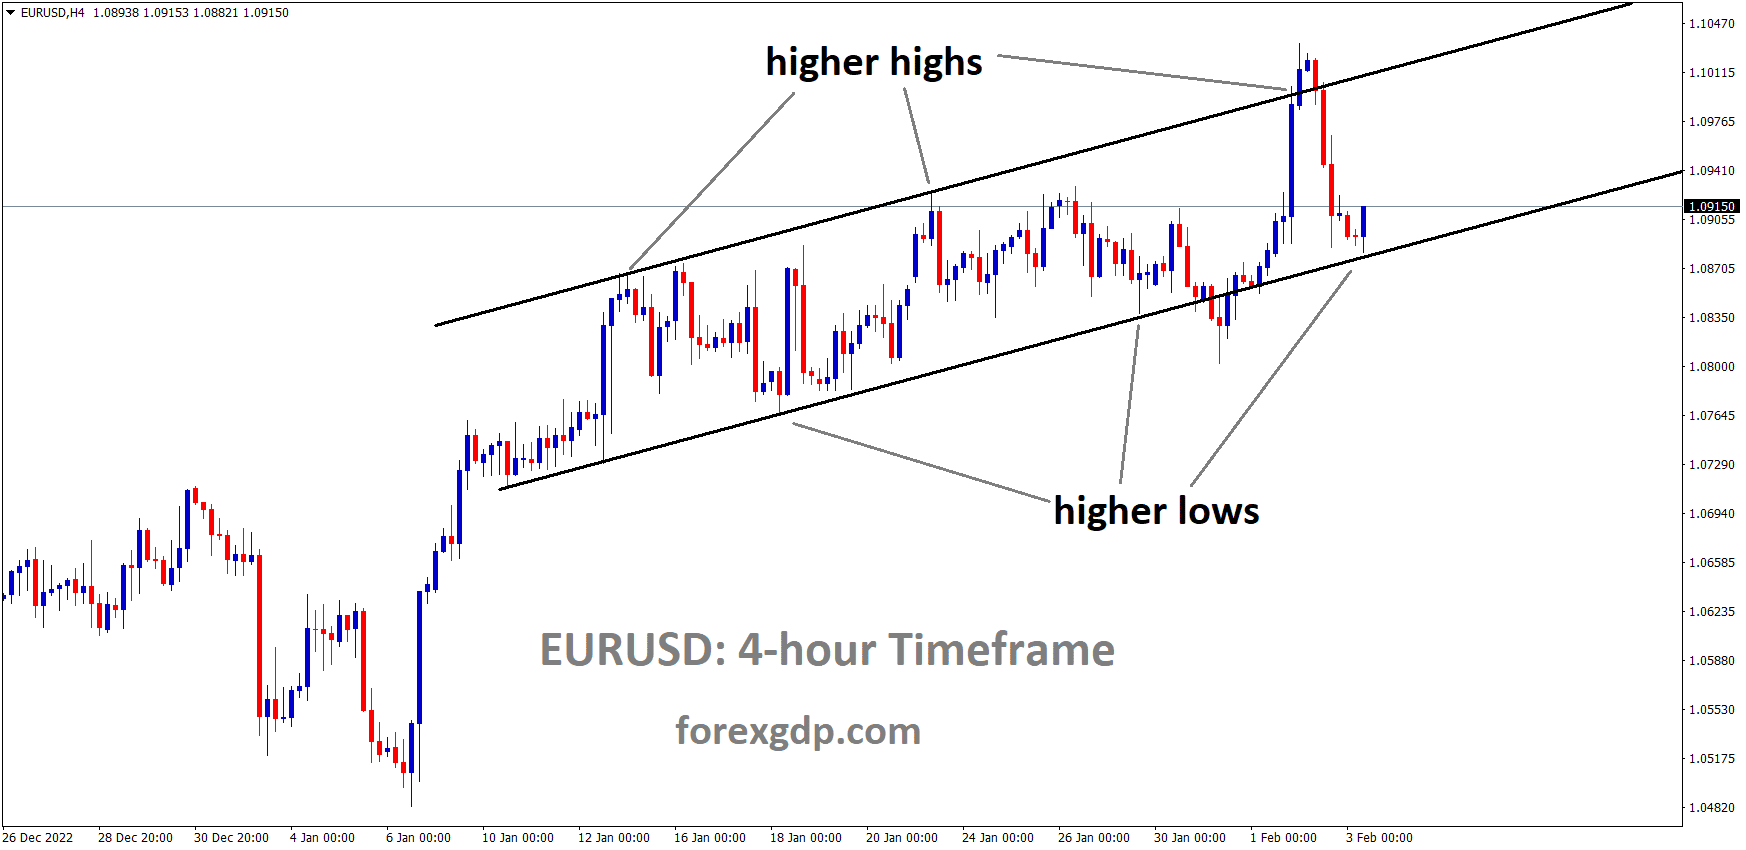 EURUSD is moving in an Ascending channel and the market has rebounded from the higher low area of the channel 1